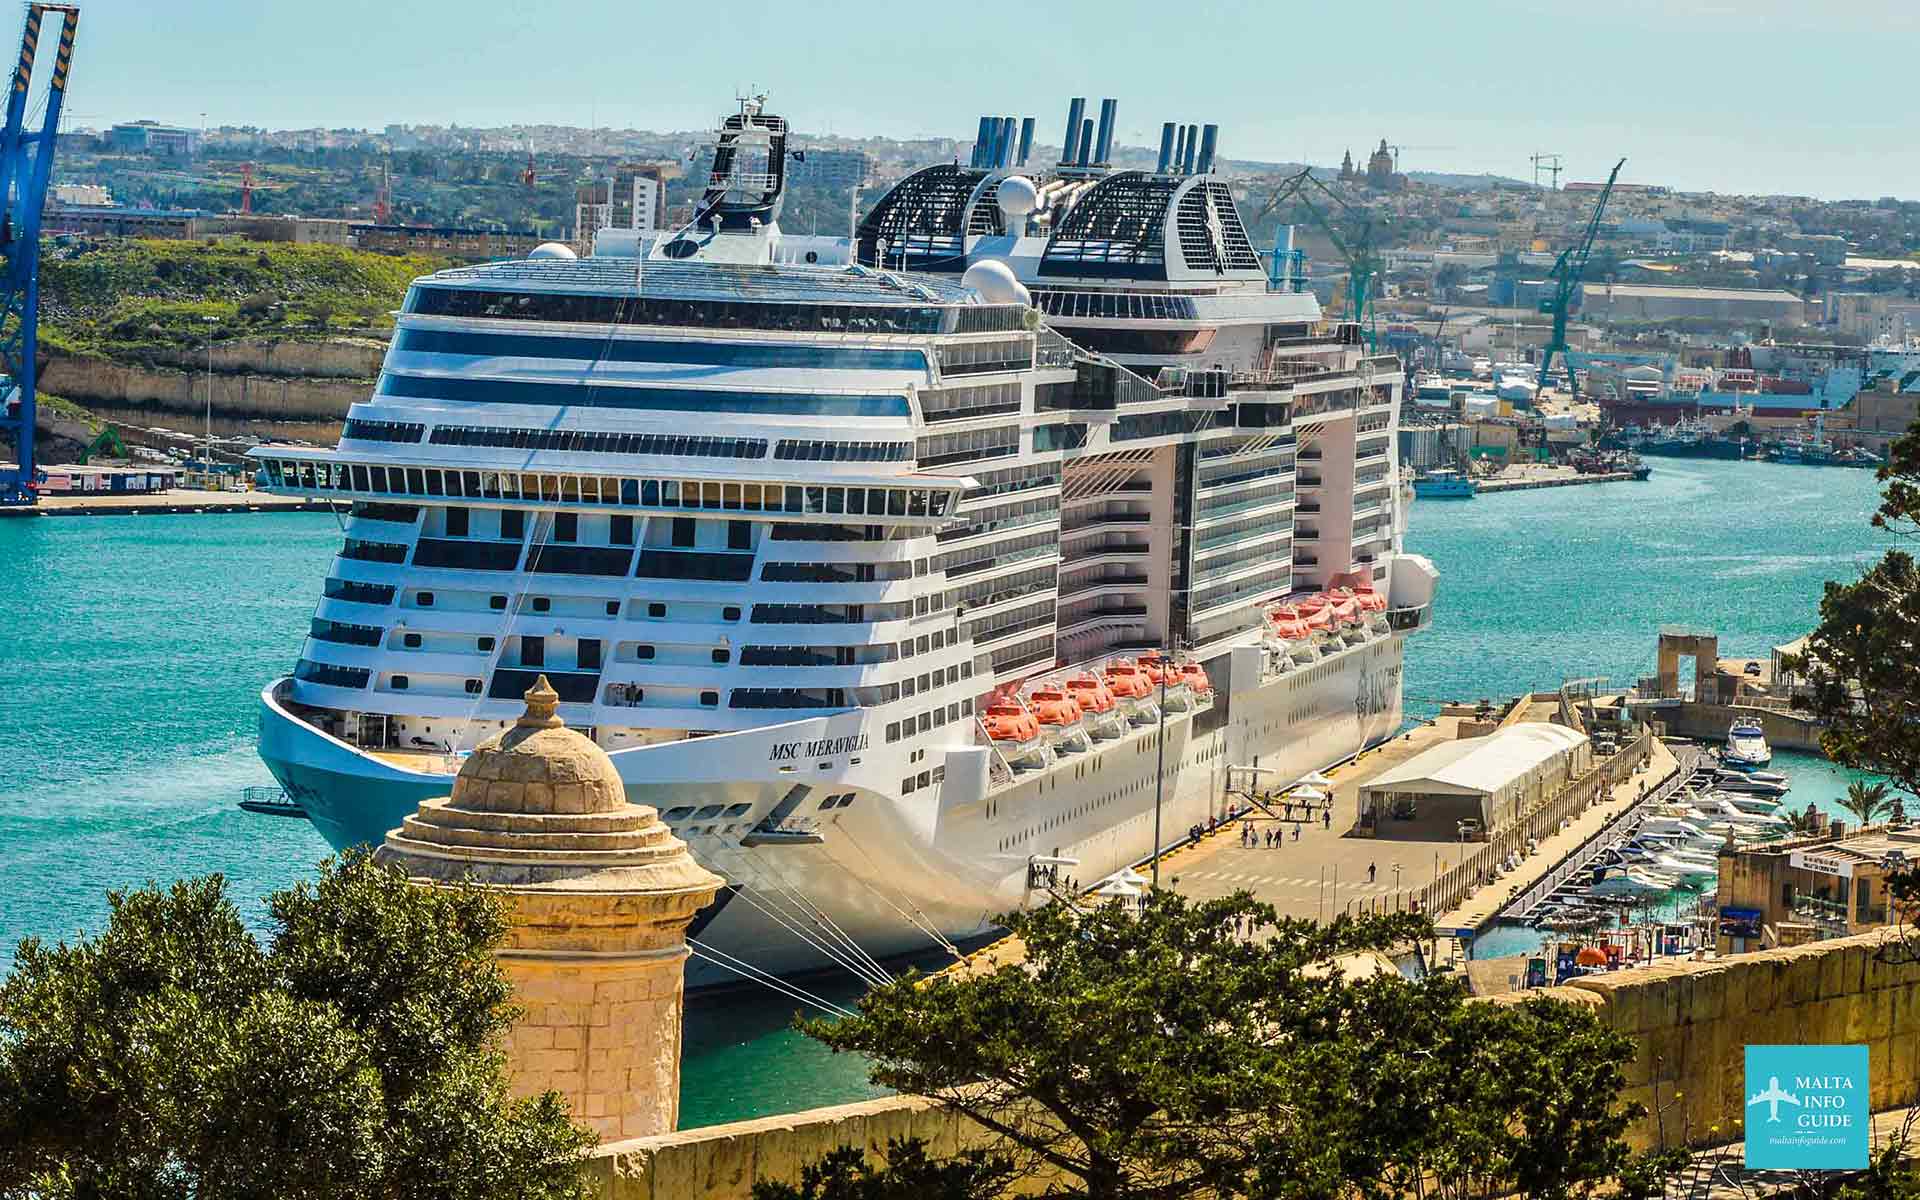 Cruise Liner berthed at Valletta Port.